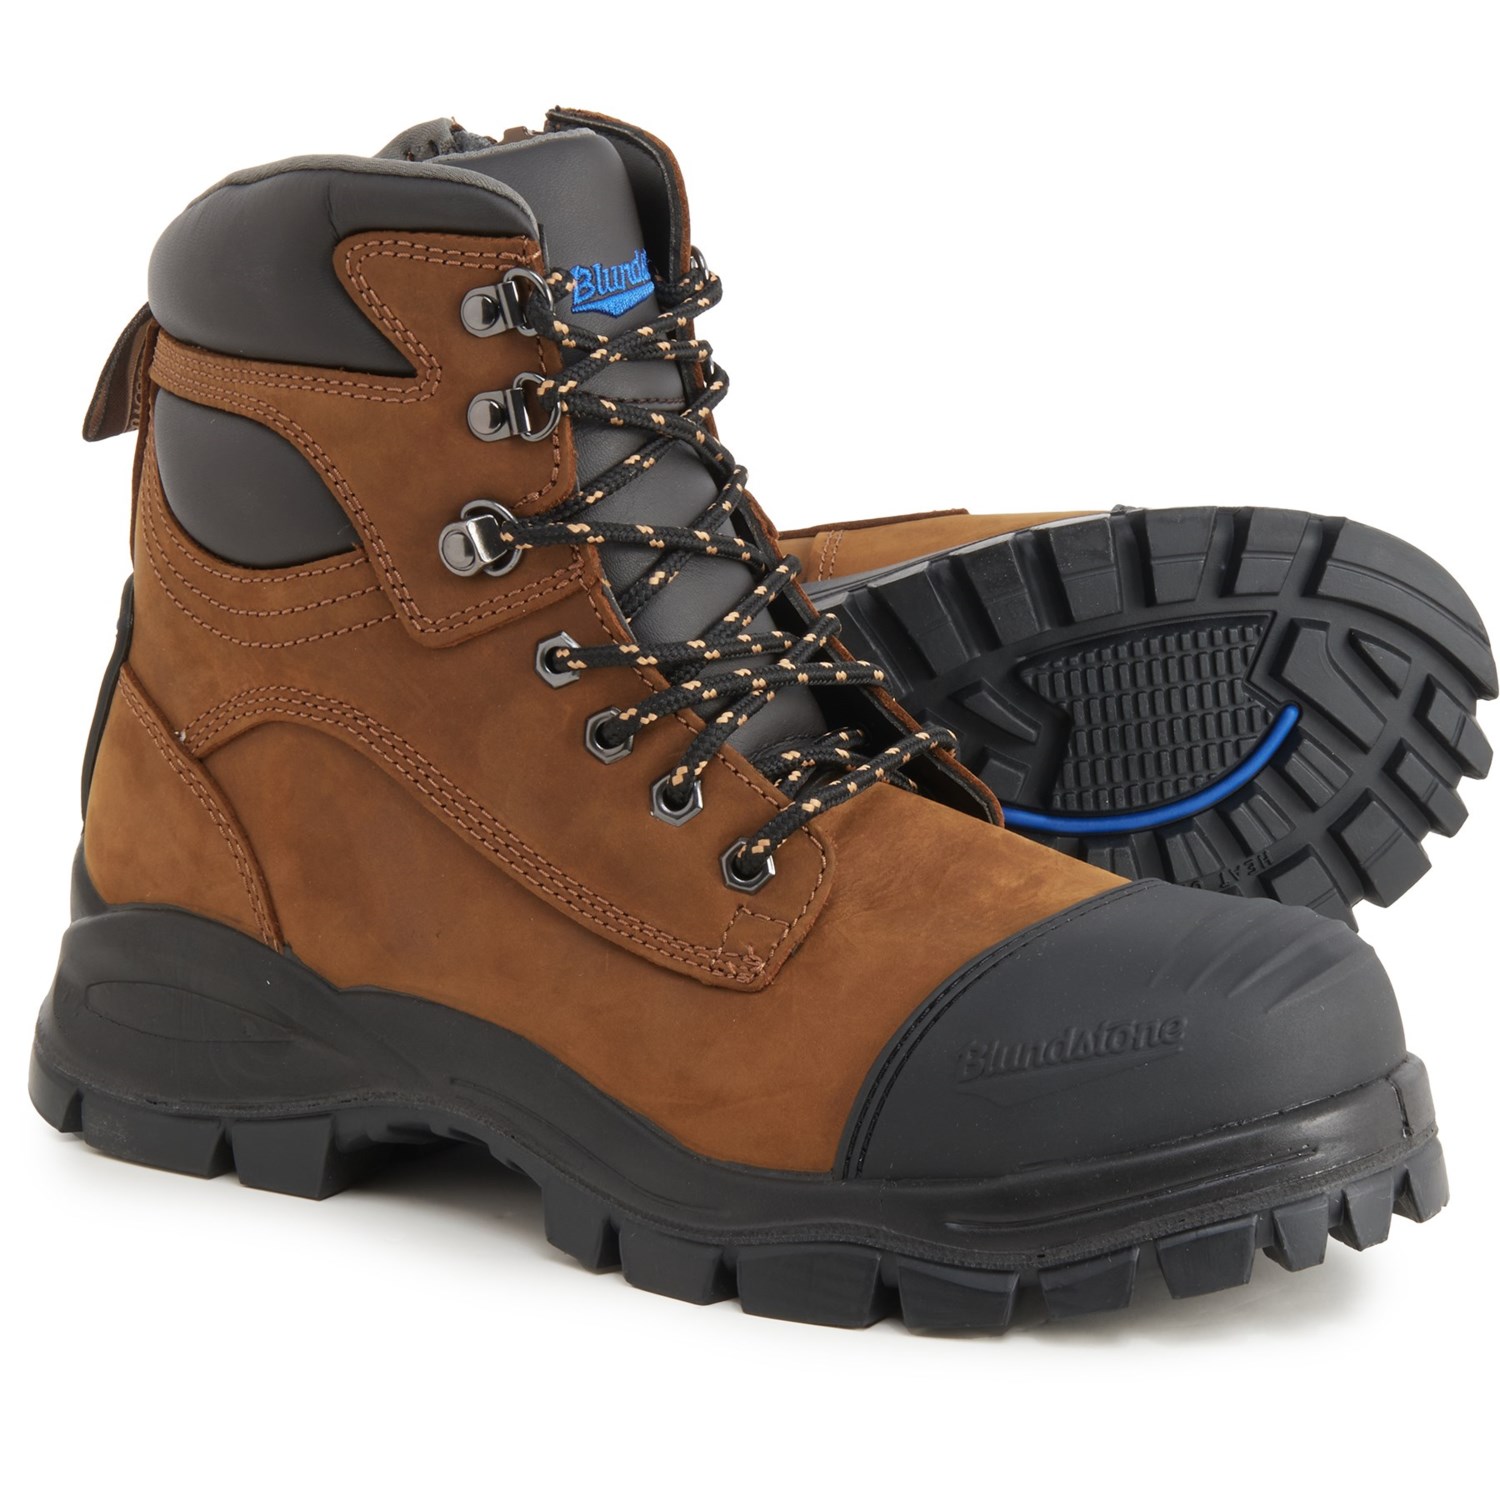 Blundstone 983 Work Series Boots - Steel Safety Toe, Leather (For Men)